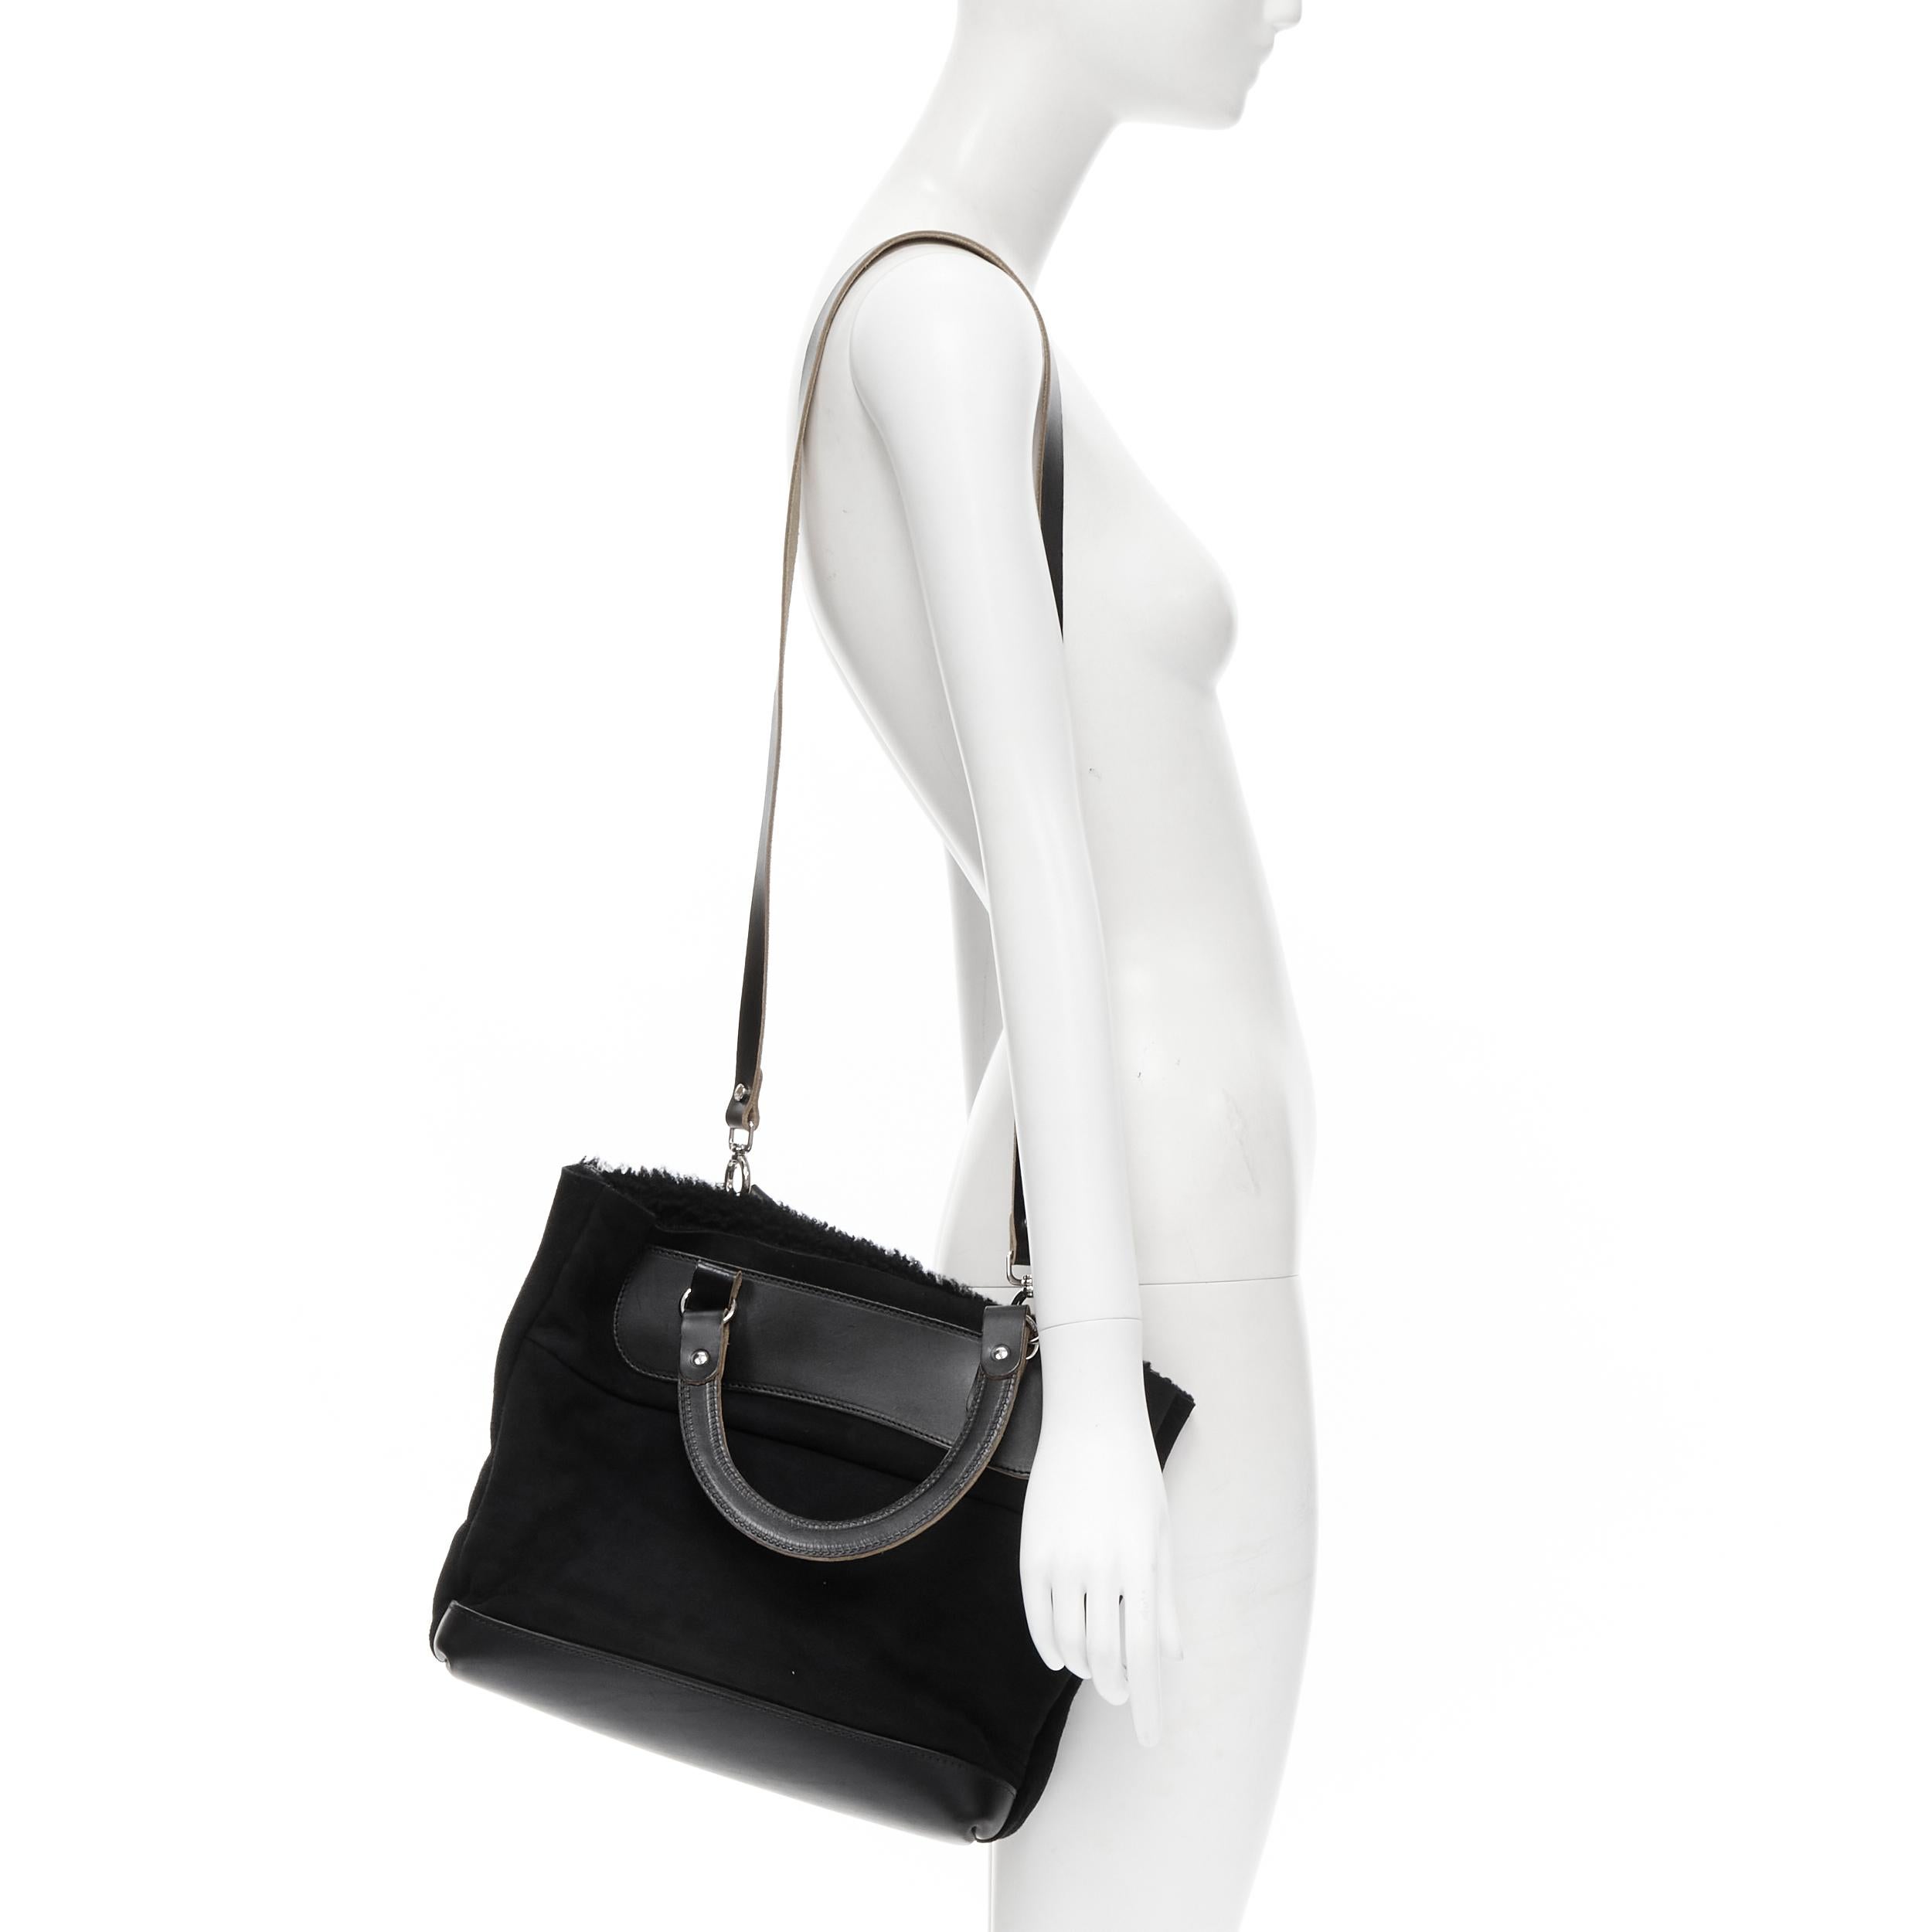 MARNI black shearling lined top handle crossbody soft tote bag 
Reference: CELG/A00050 
Brand: Marni 
Model: Shearling tote 
Material: Leather 
Color: Black 
Pattern: Solid 
Extra Detail: Adjustable shoulder strap. 
Made in: Italy 

CONDITION: